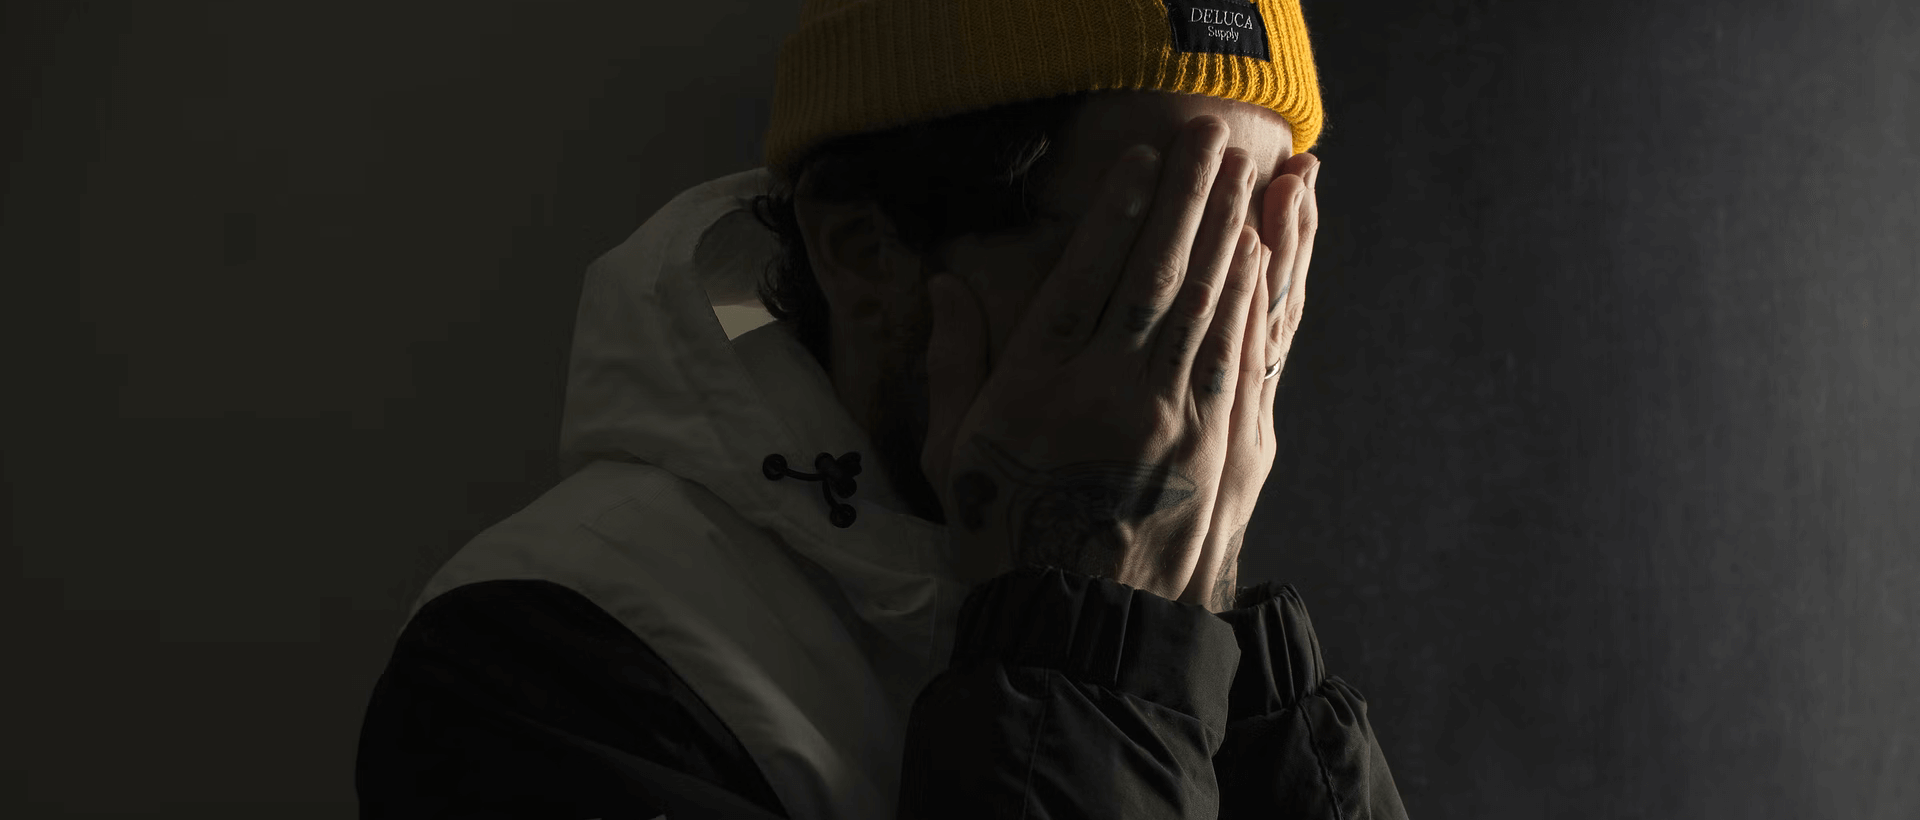 a man in a yellow hat covers his face with his hands.